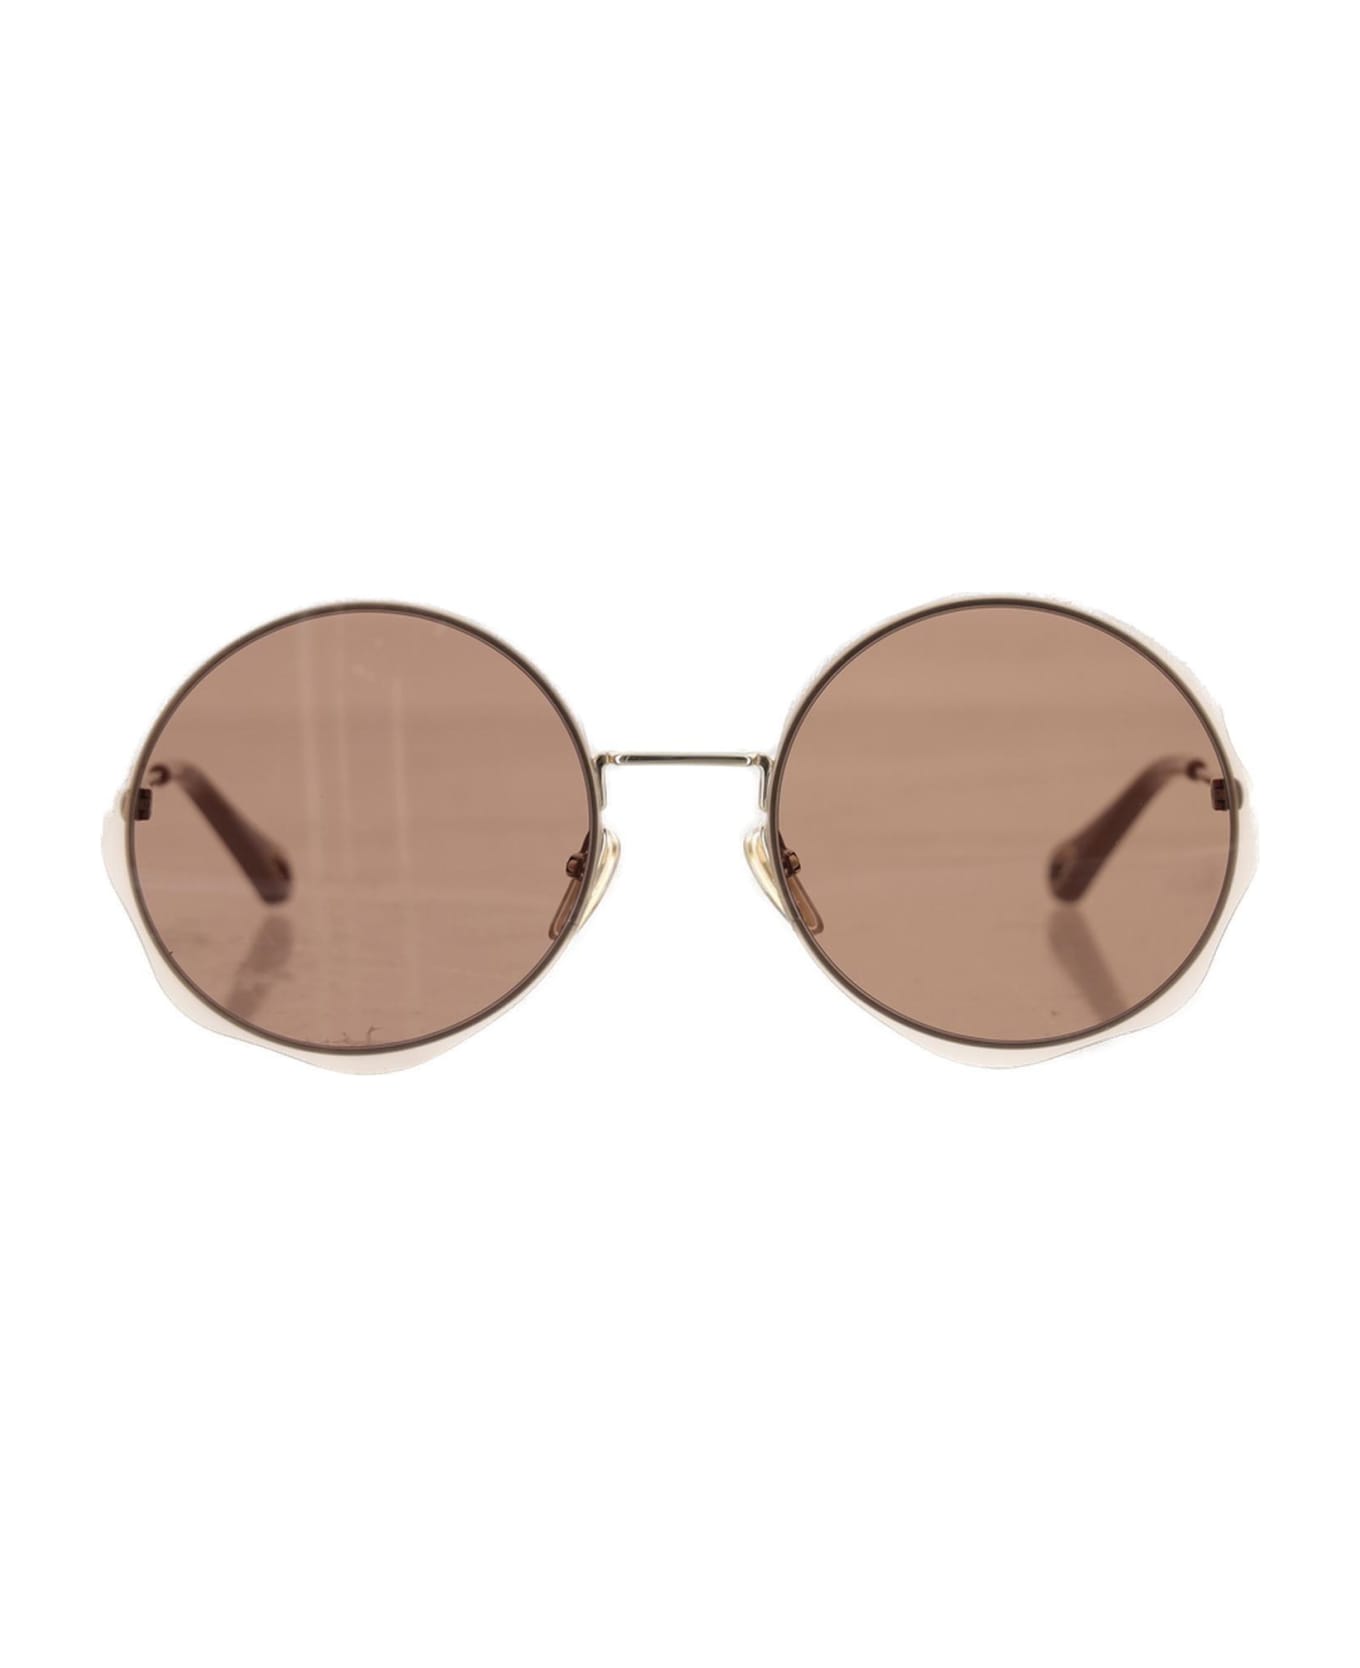 Chloé Honore Sunglasses - Gold/brown サングラス